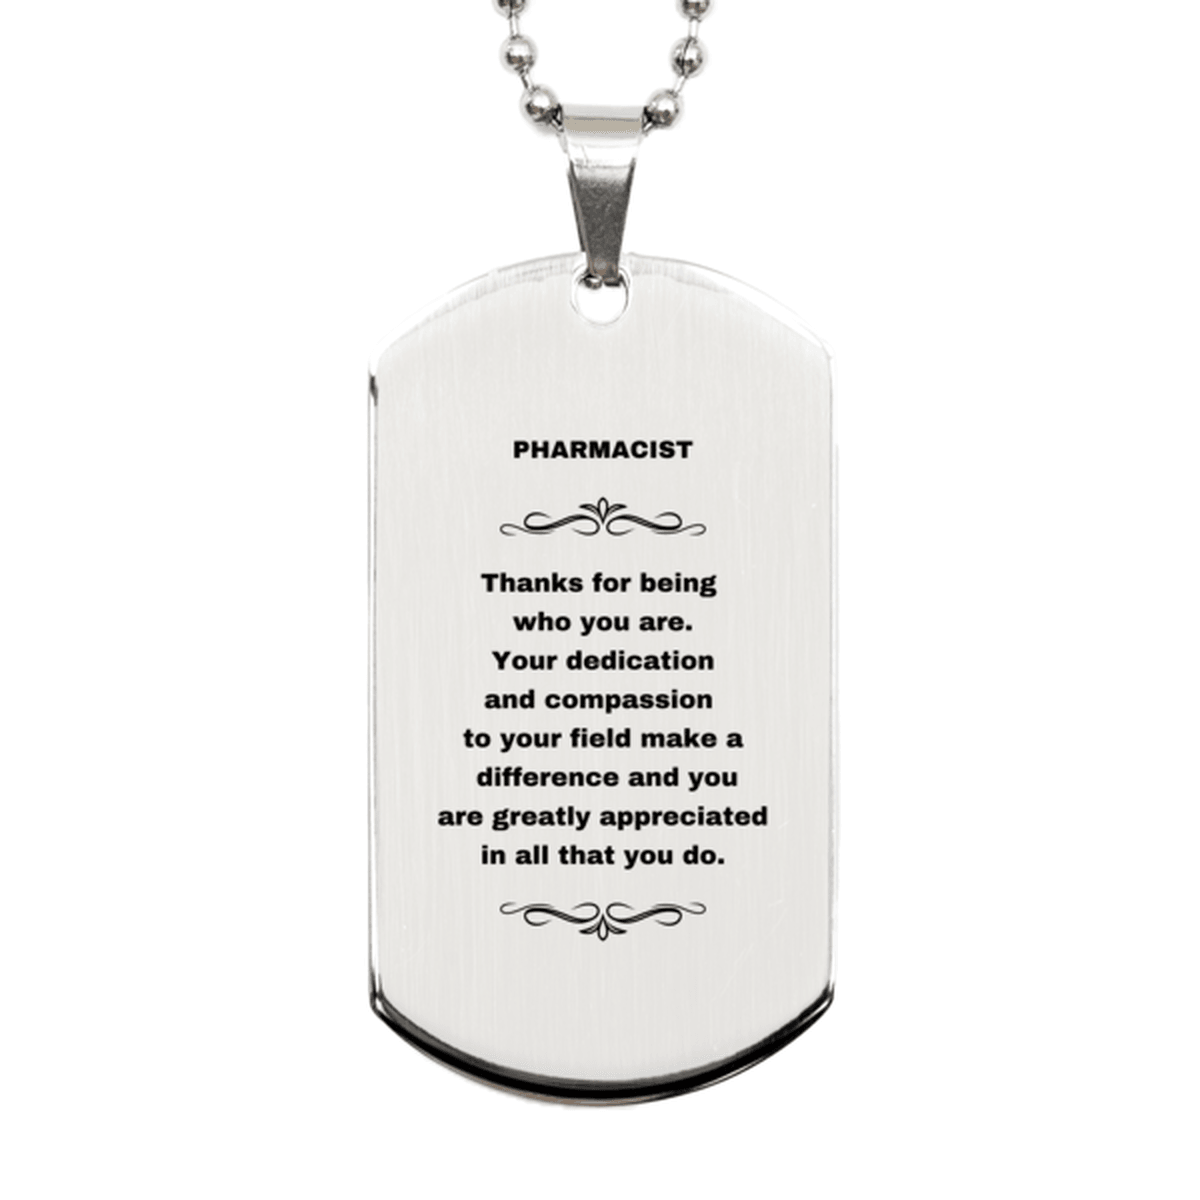 Pharmacist Silver Dog Tag Engraved Necklace - Thanks for being who you are - Birthday Christmas Jewelry Gifts Coworkers Colleague Boss - Mallard Moon Gift Shop